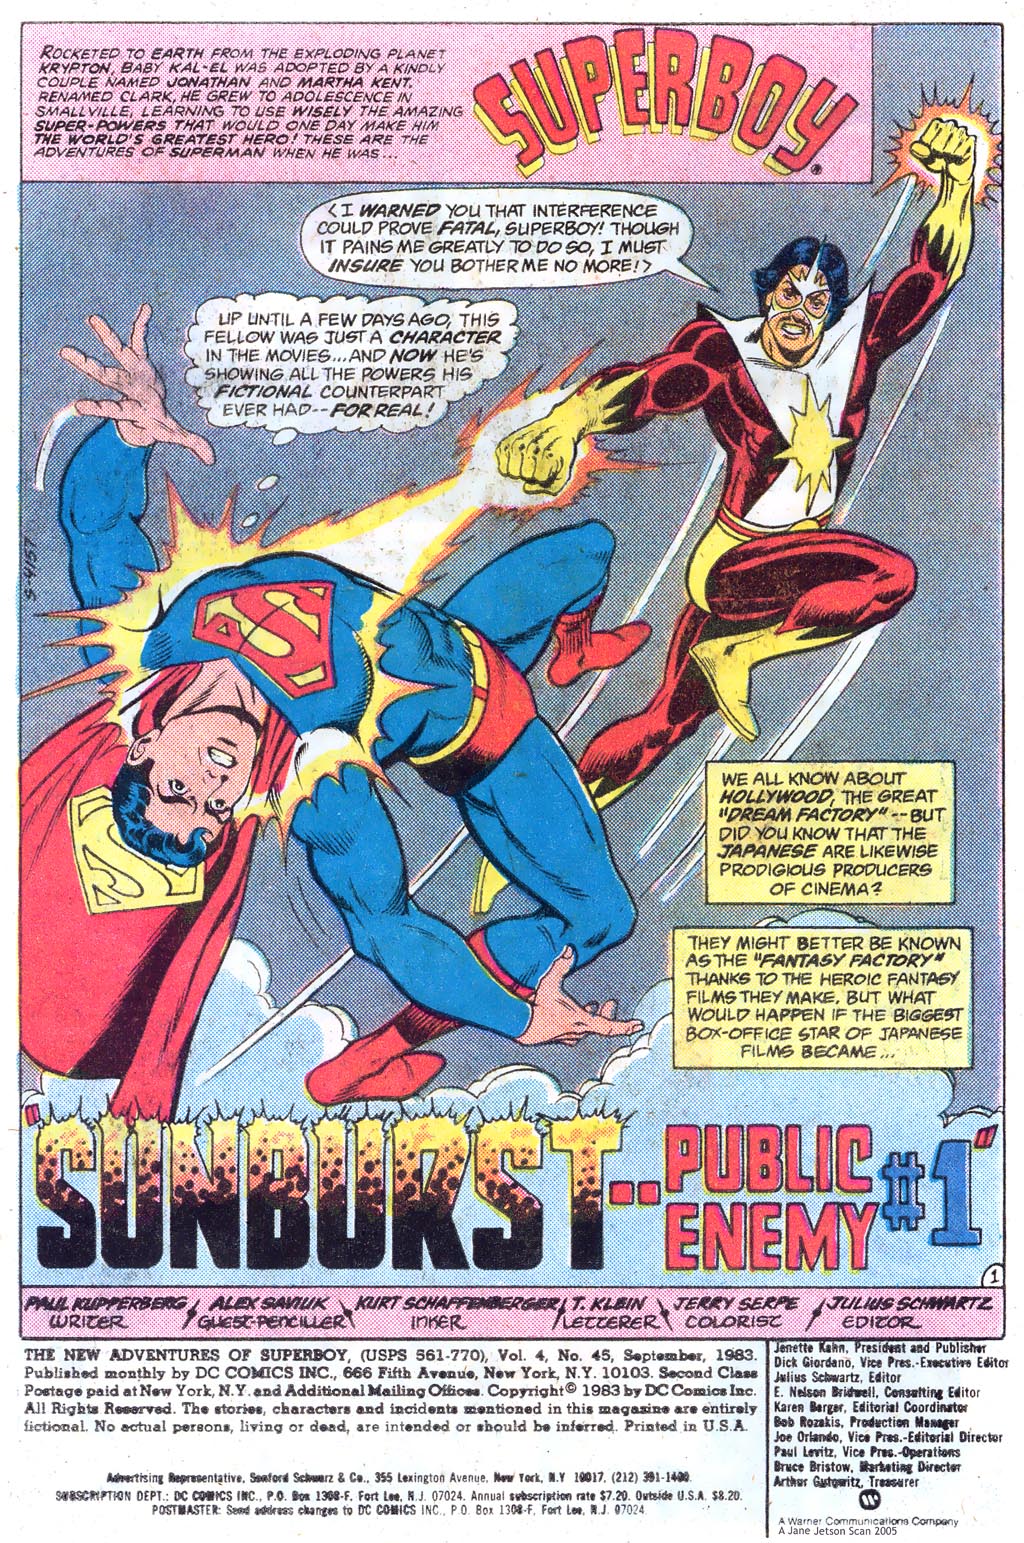 The New Adventures of Superboy 45 Page 2